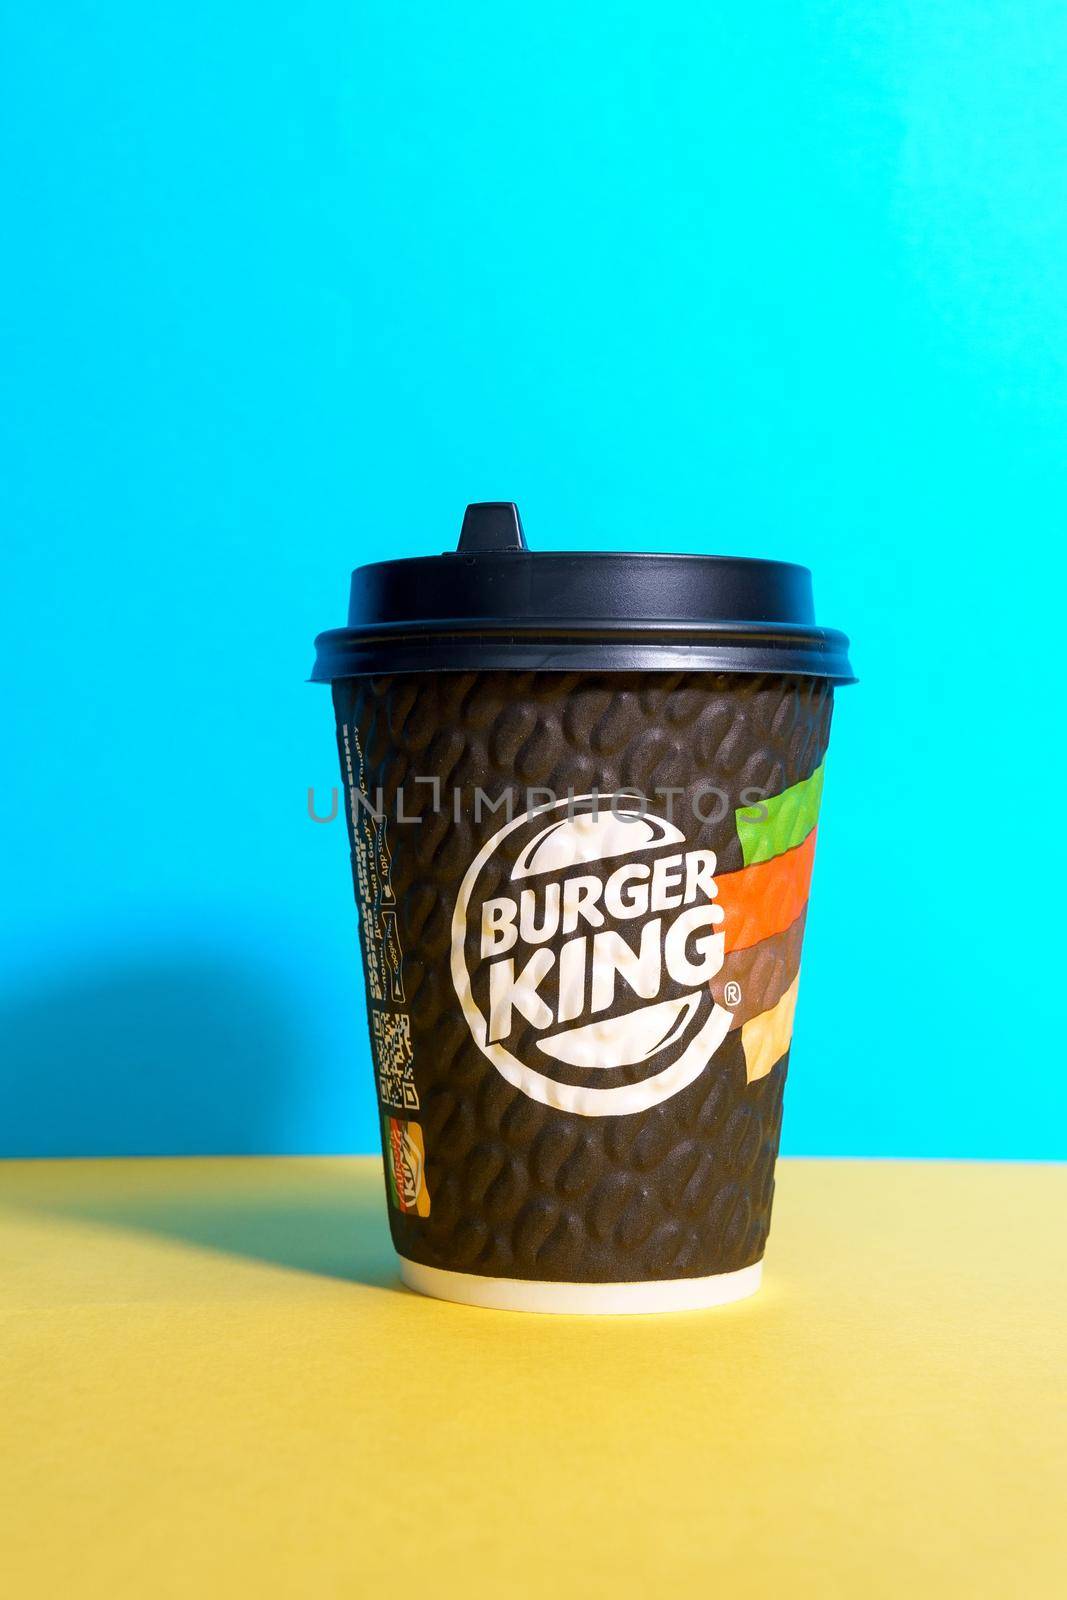 Tyumen, Russia - April 14, 2021: Coffee from a fast food restaurant Burger King logo. Vertical photo